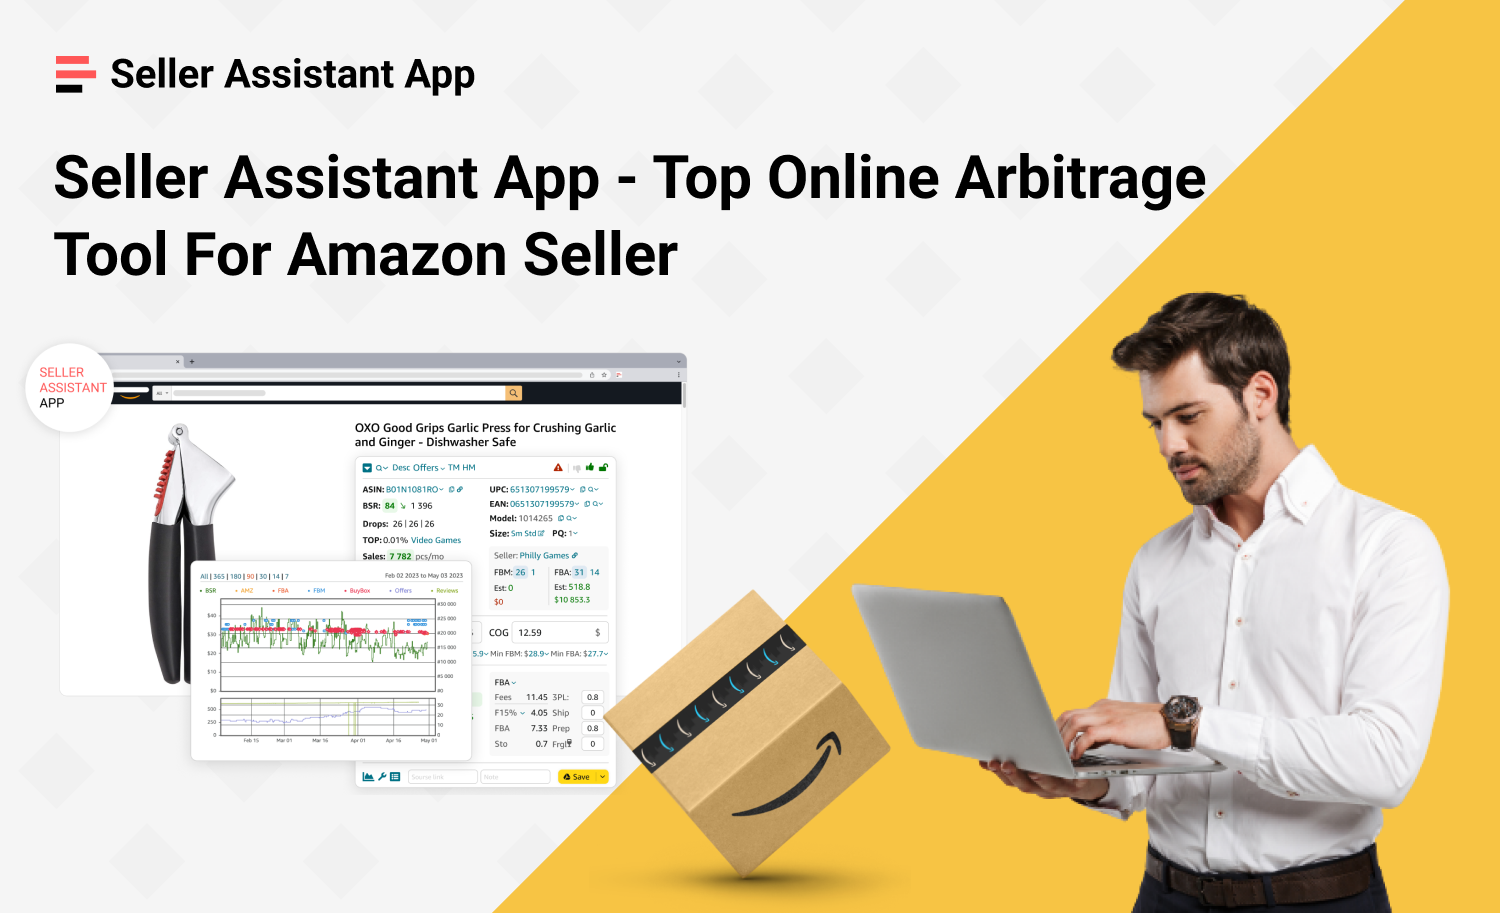 Seller Assistant App — Top Online Arbitrage Tool For Amazon Sellers